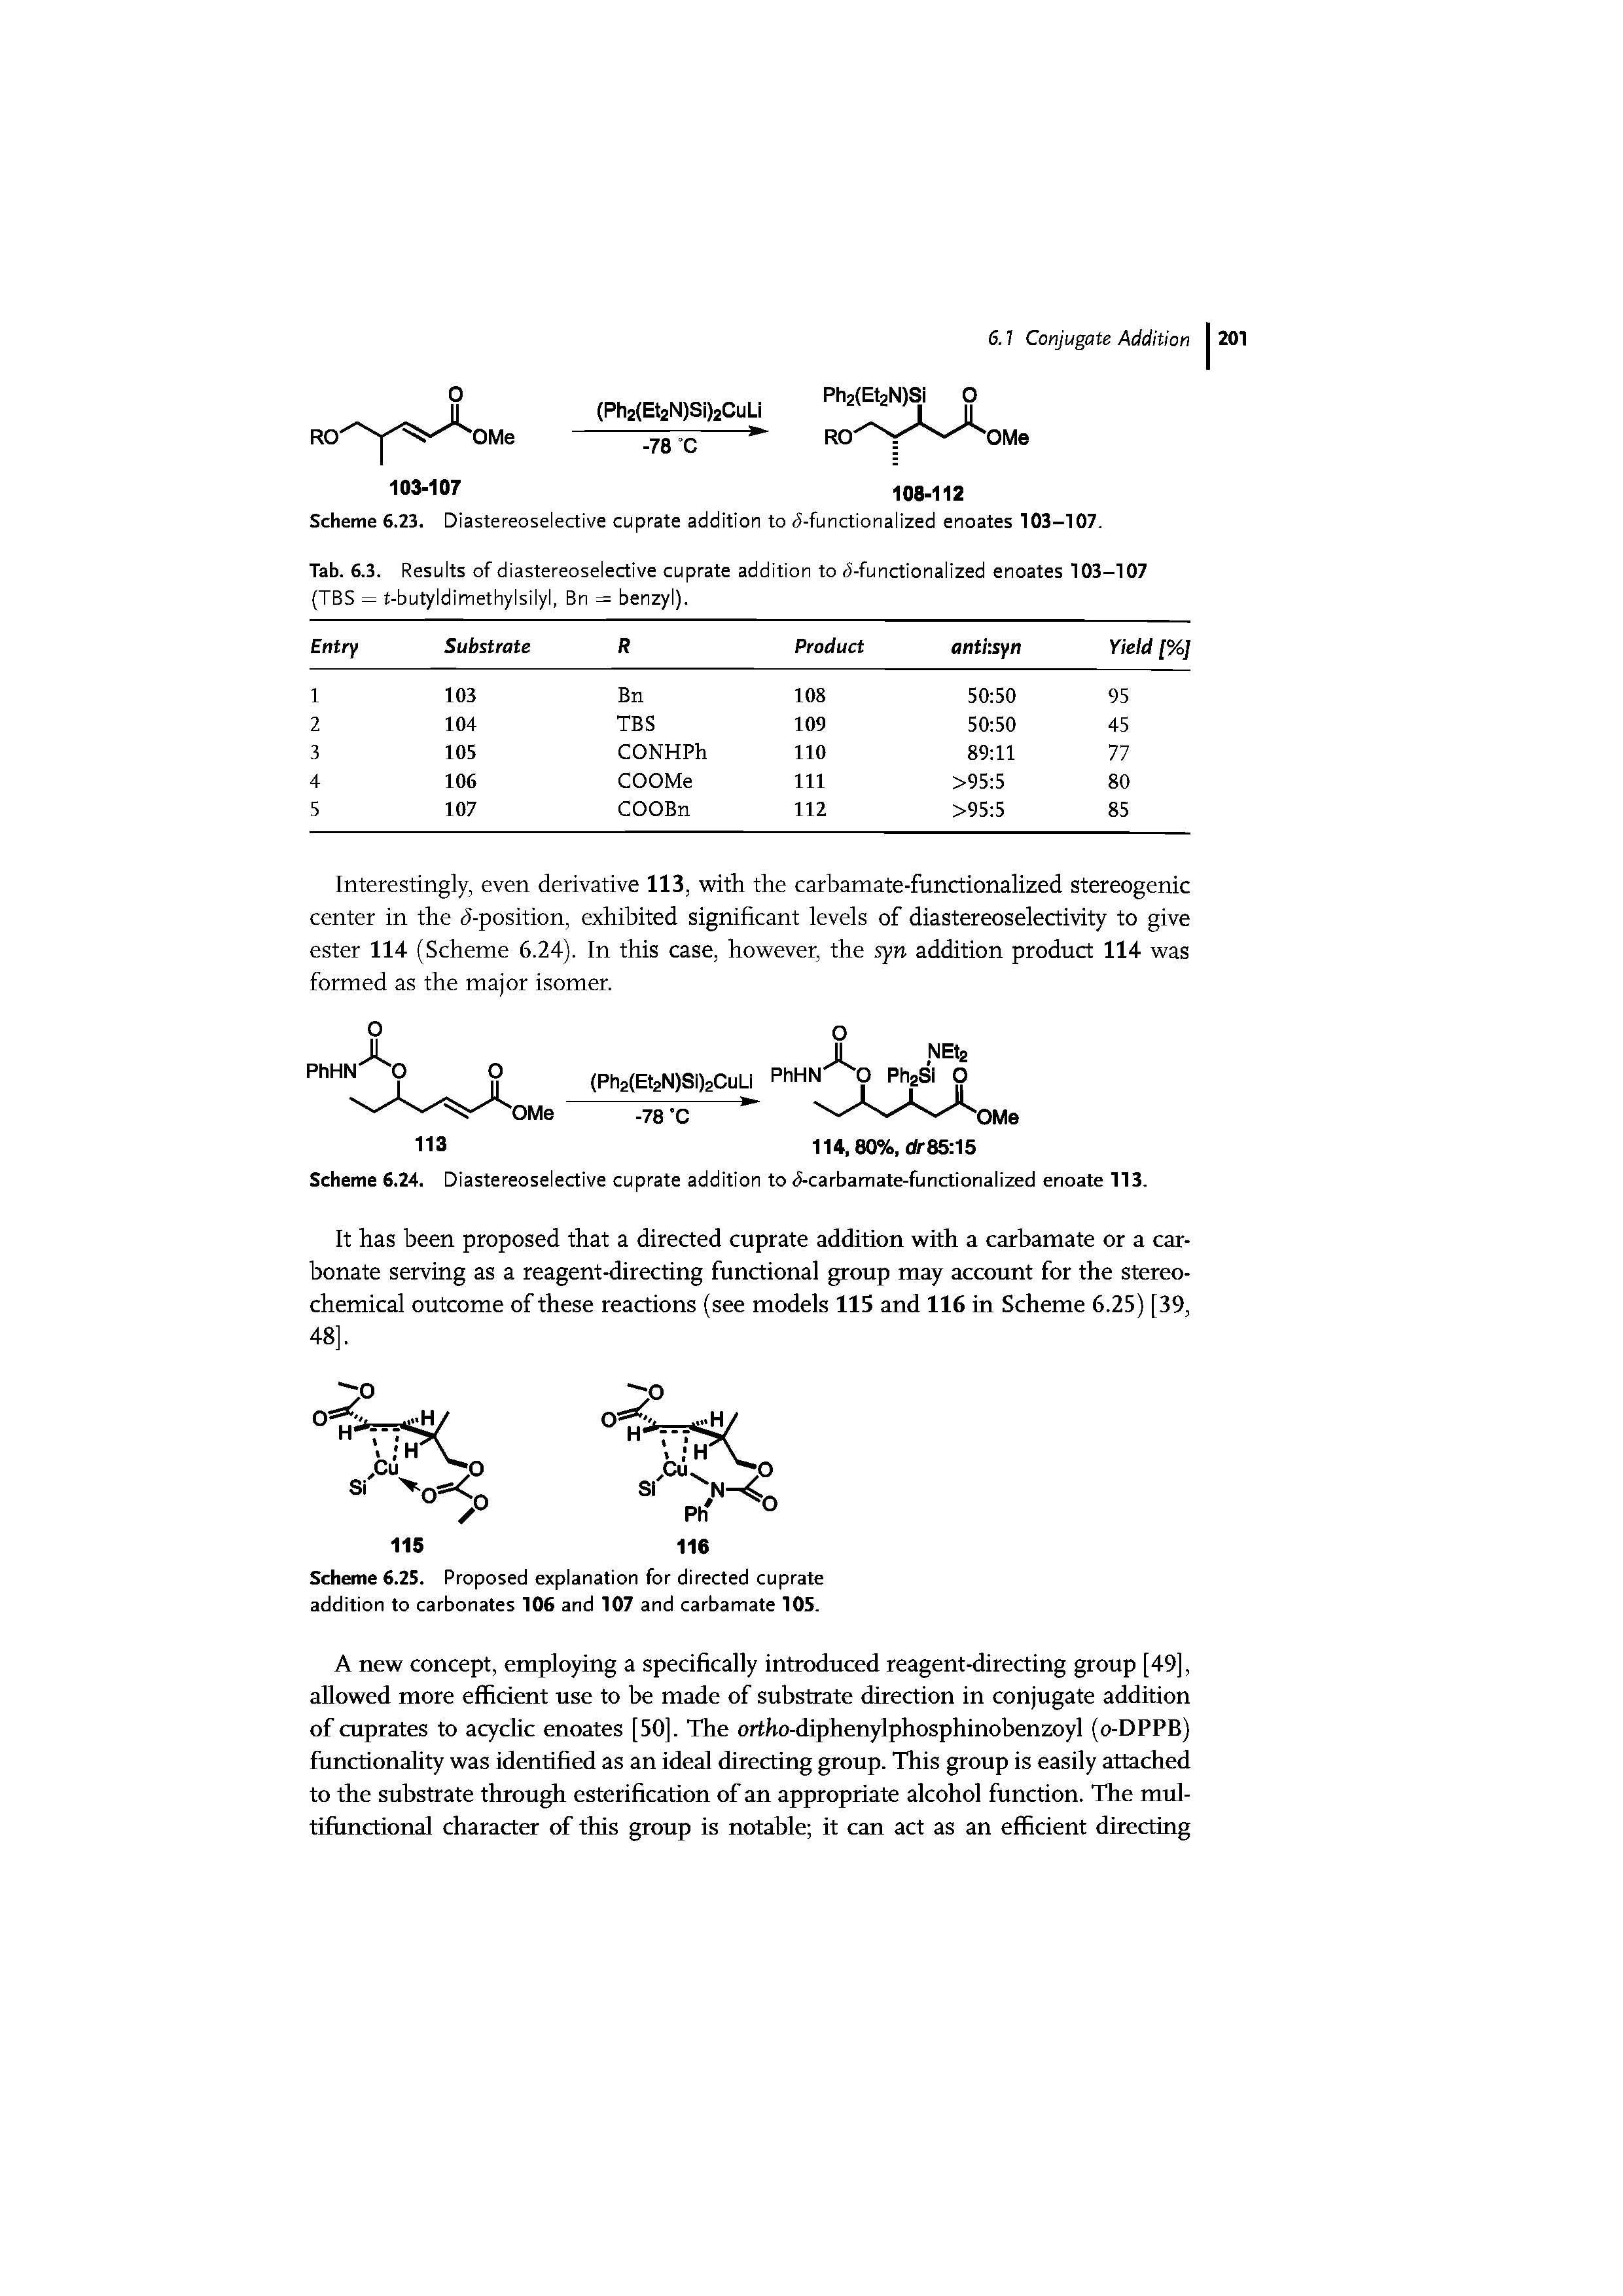 Scheme 6.24. Diastereoselective cuprate addition to -carbamate-functionalized enoate 113.